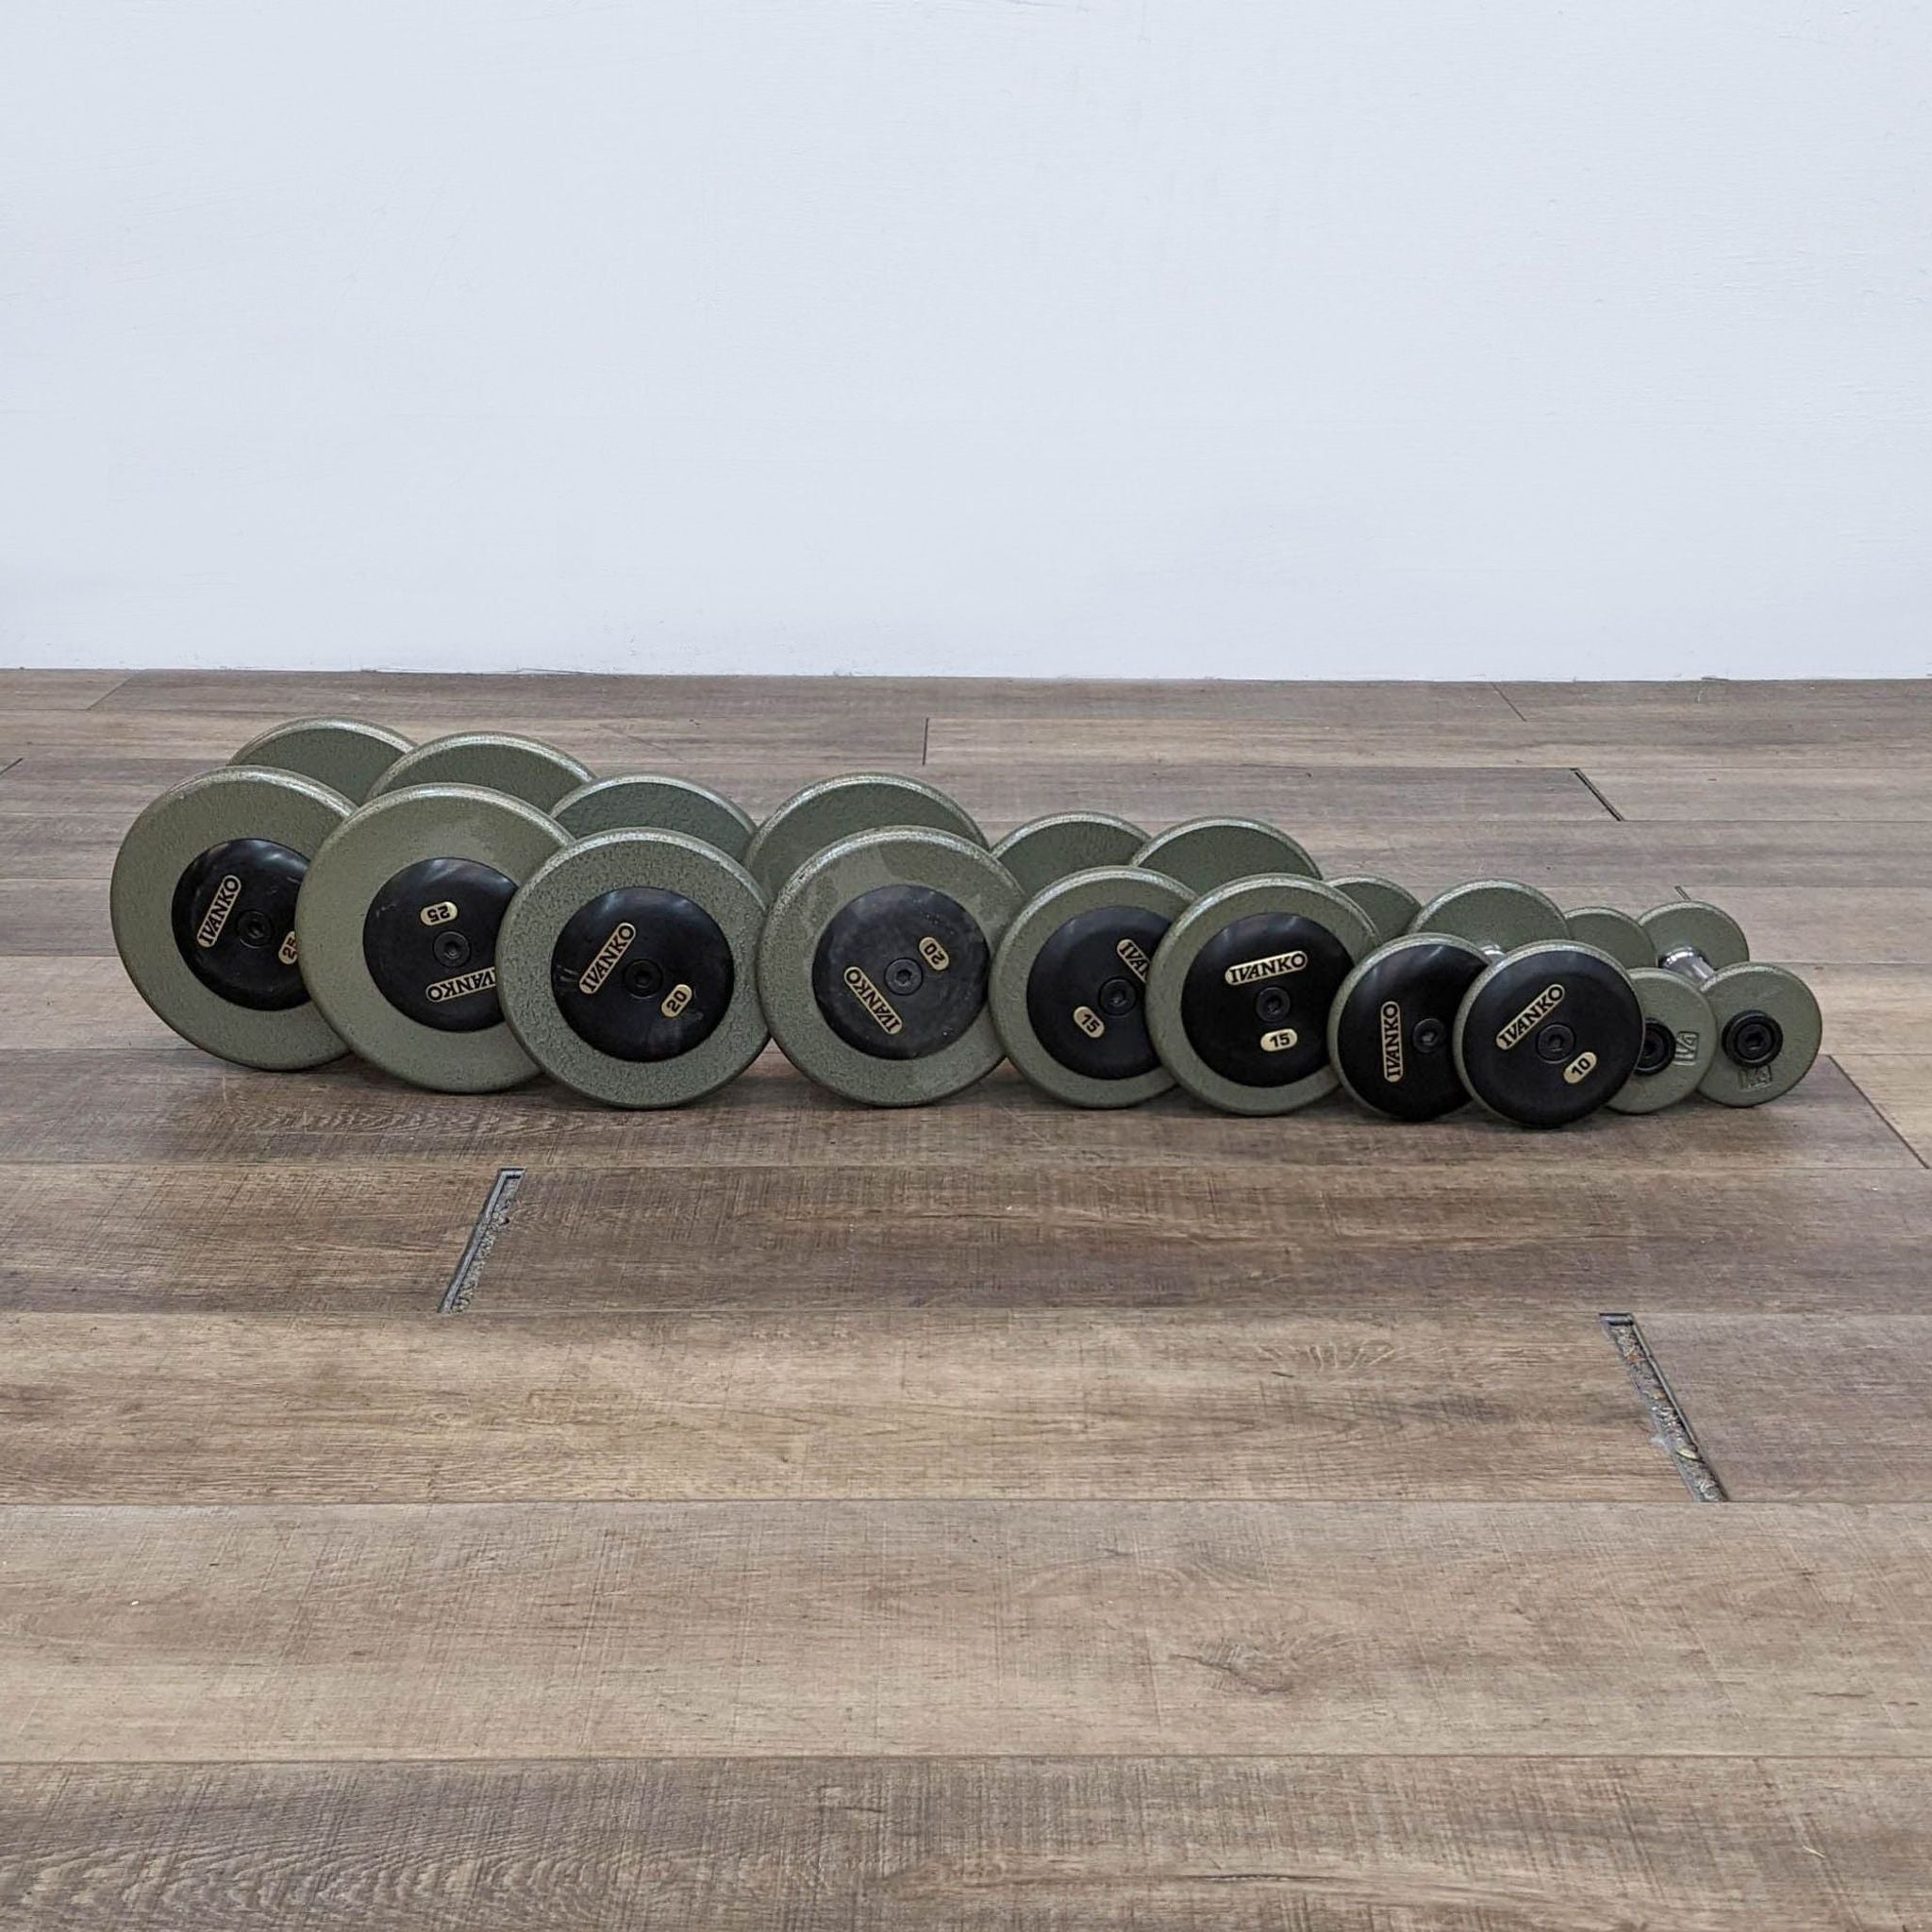 A row of Ivanko branded dumbbells on a wooden floor, in ascending order by size.